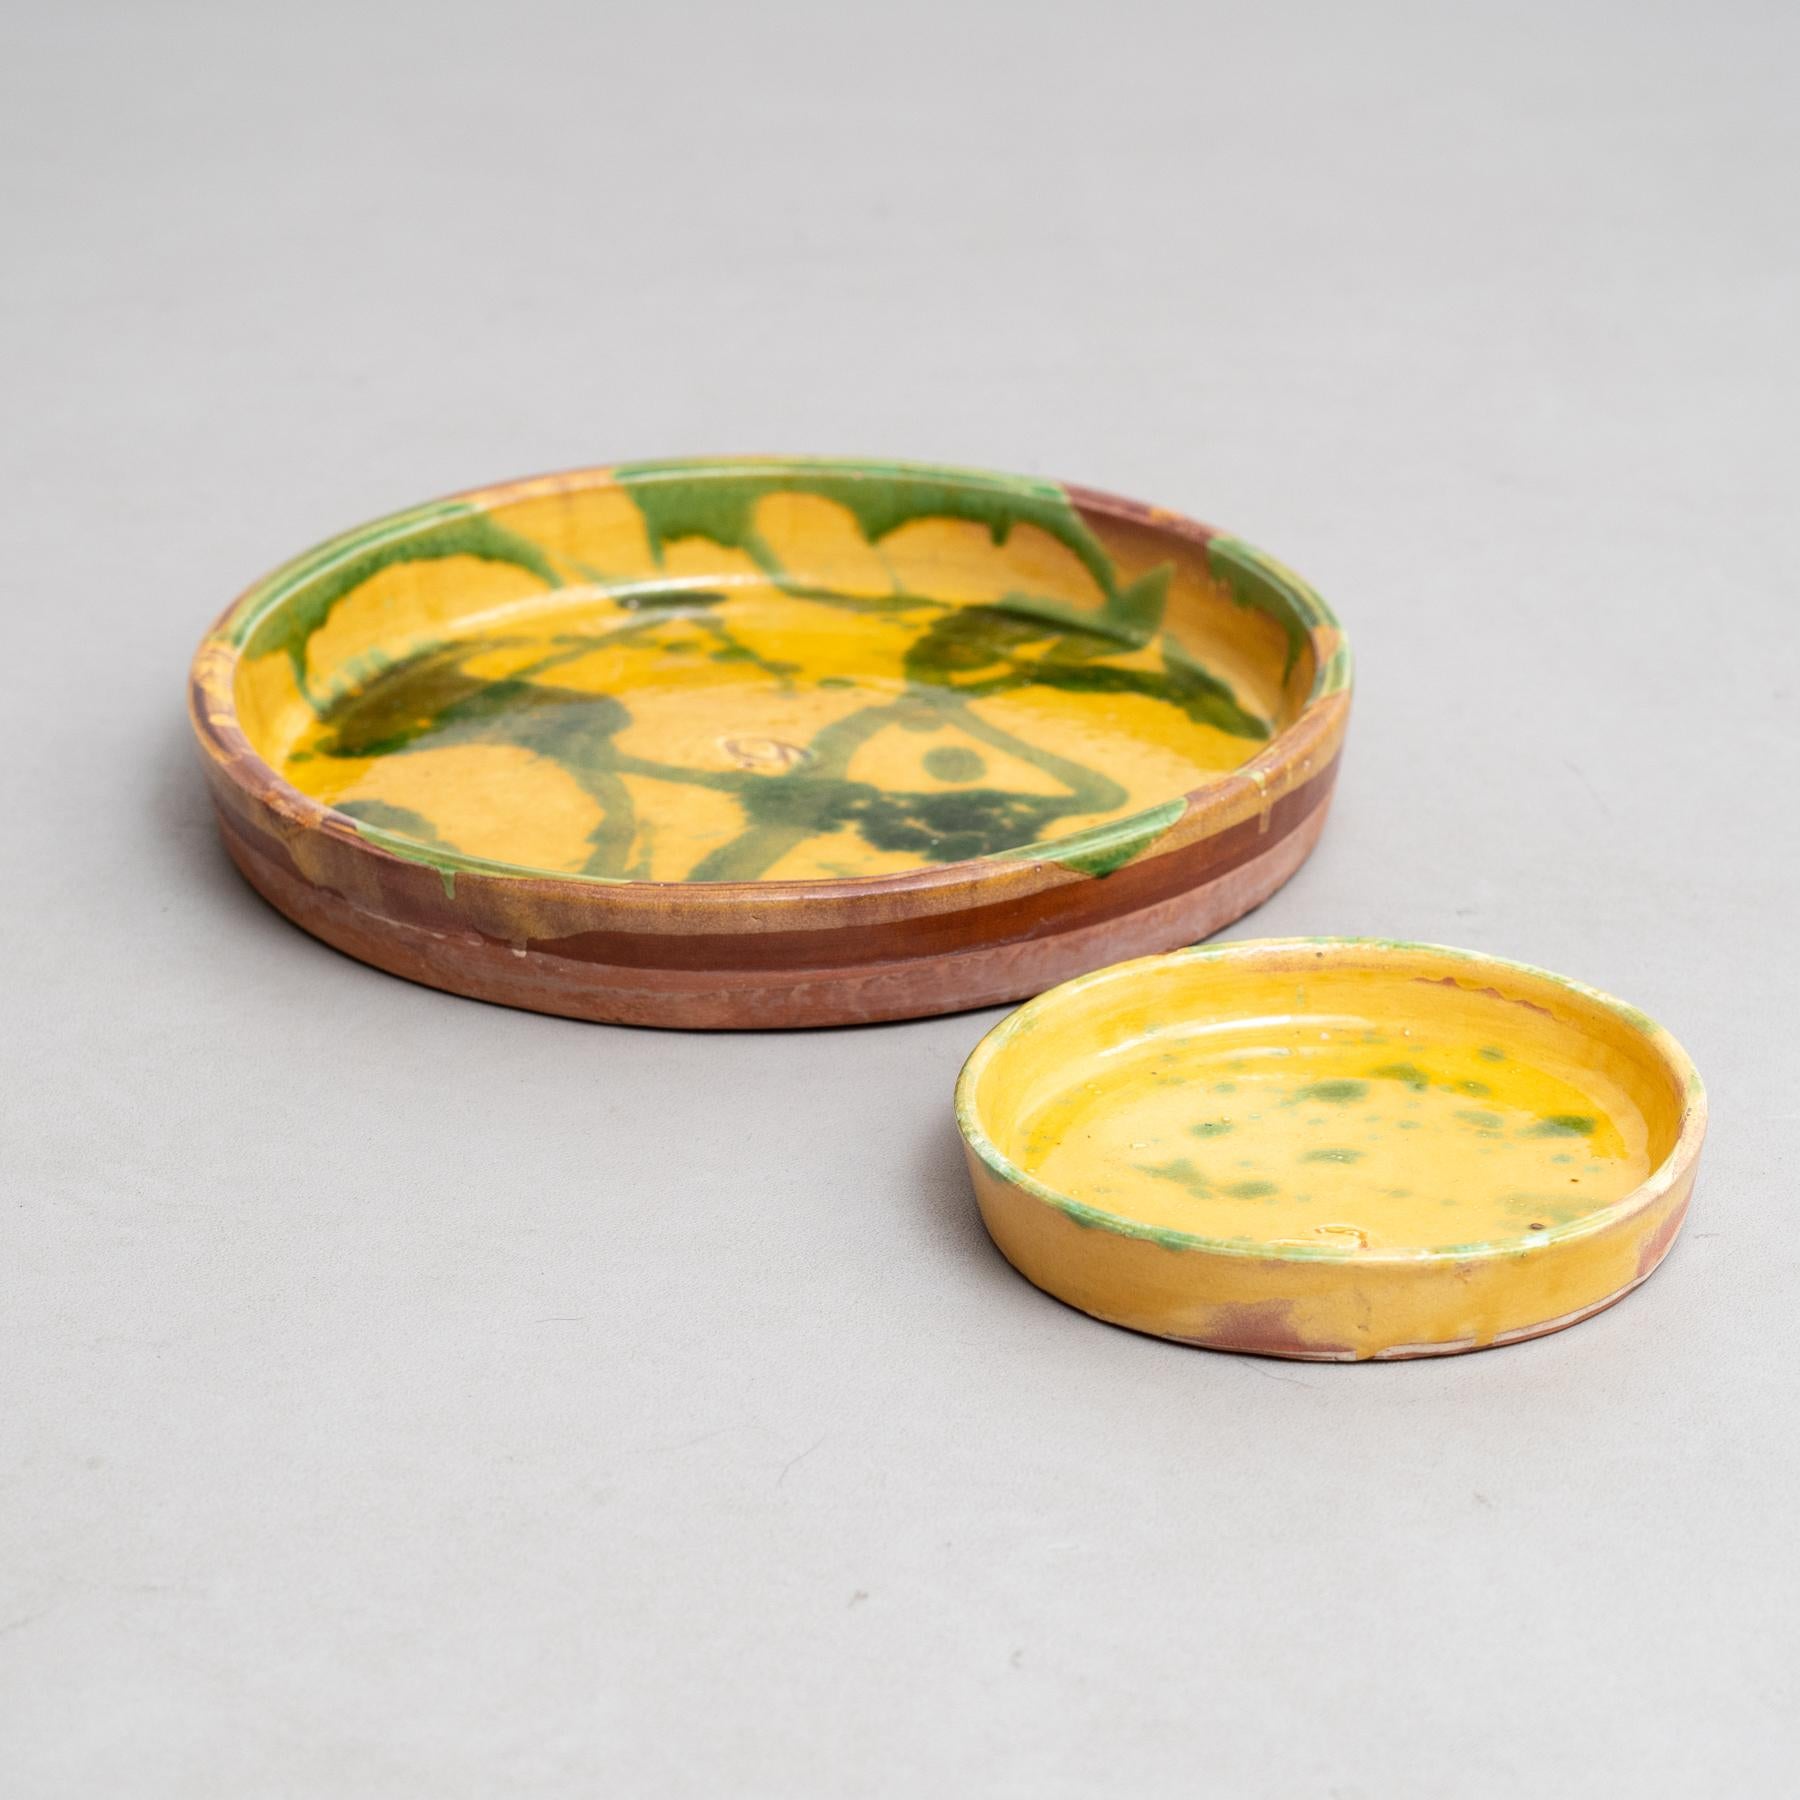 Set of two Early 20th century hand painted rustic popular traditional ceramic.
By unknown artisan, France.
In original condition, with minor wear consistent with age and use, preserving a beautiful patina.

Materials:
Ceramic

